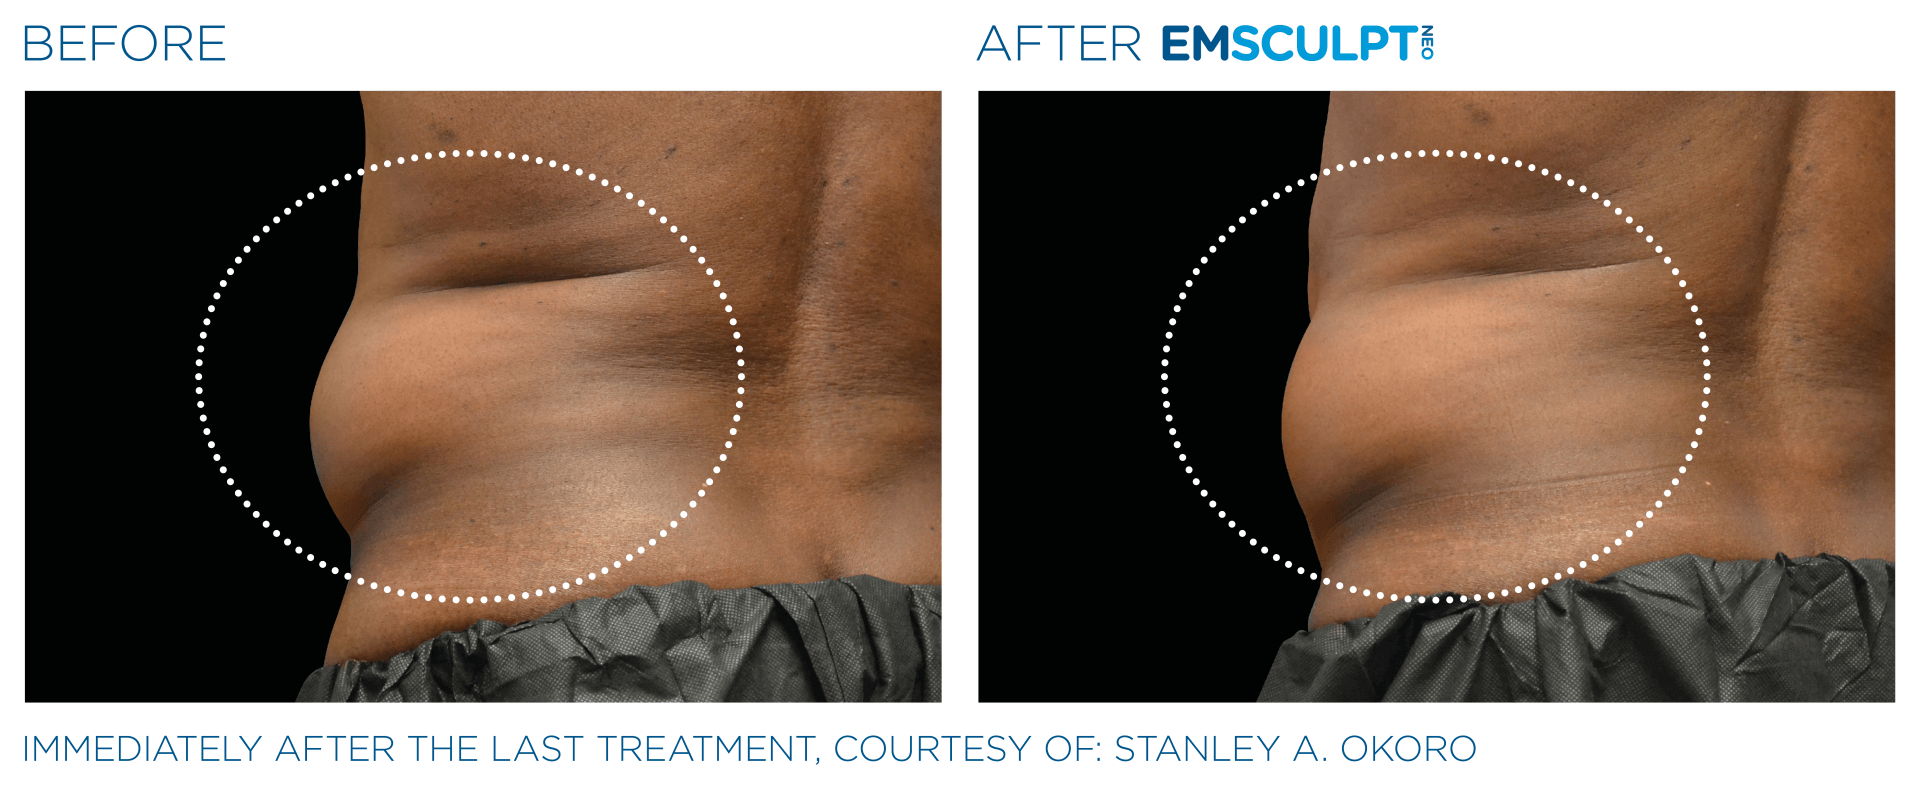 Jelly roll results with Emsculpt neo at Dr. Mantor's Wrinkle and Weight Solutions in Westerville, OH book your free trial today!